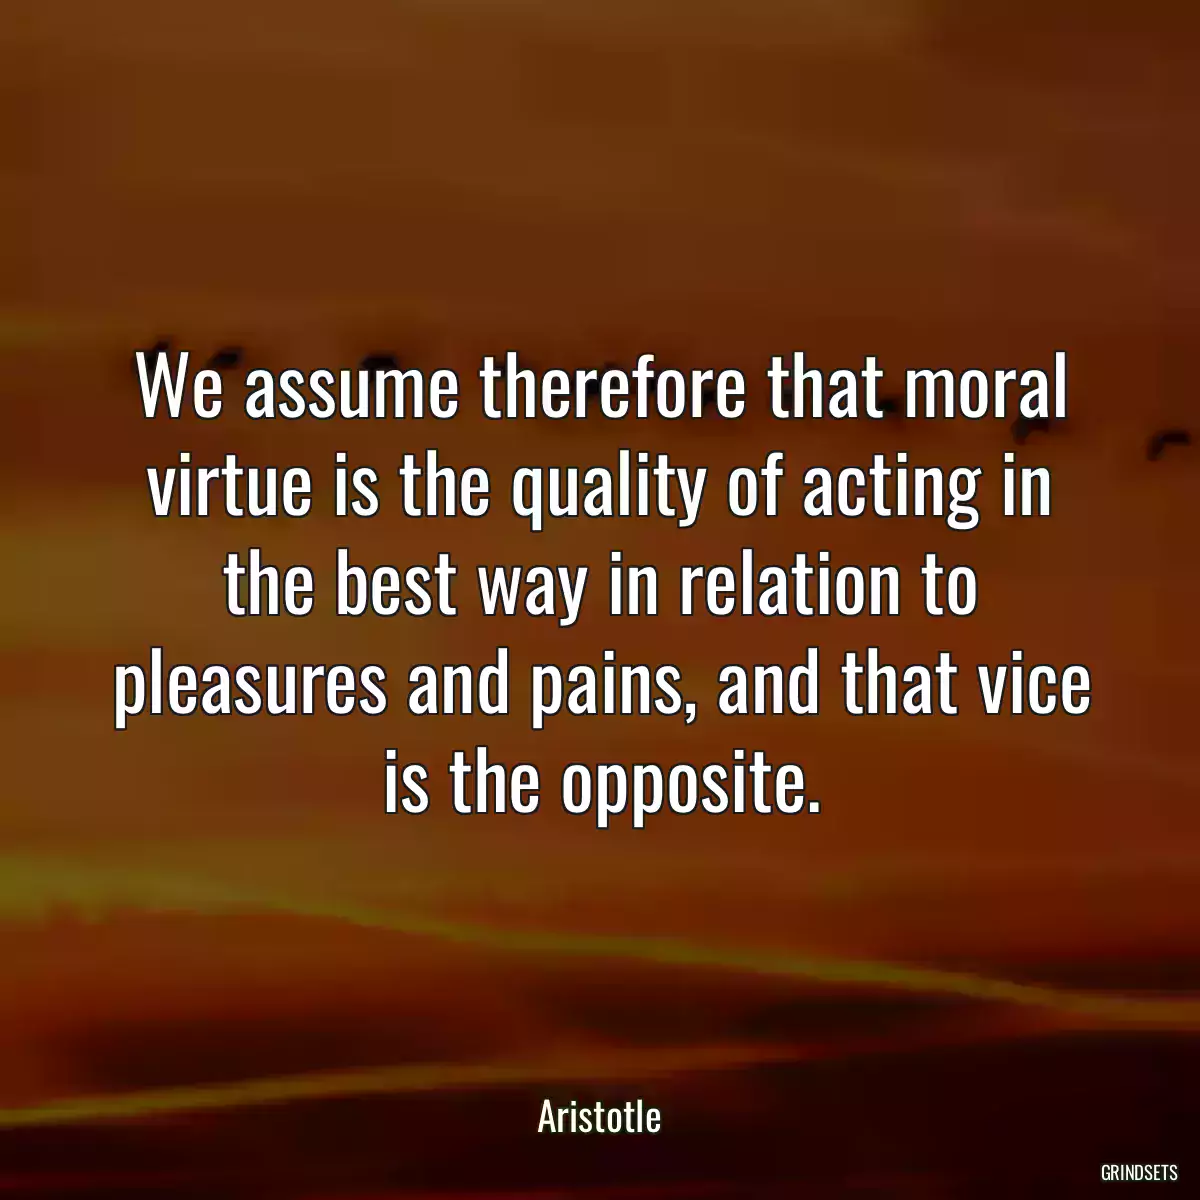 We assume therefore that moral virtue is the quality of acting in the best way in relation to pleasures and pains, and that vice is the opposite.